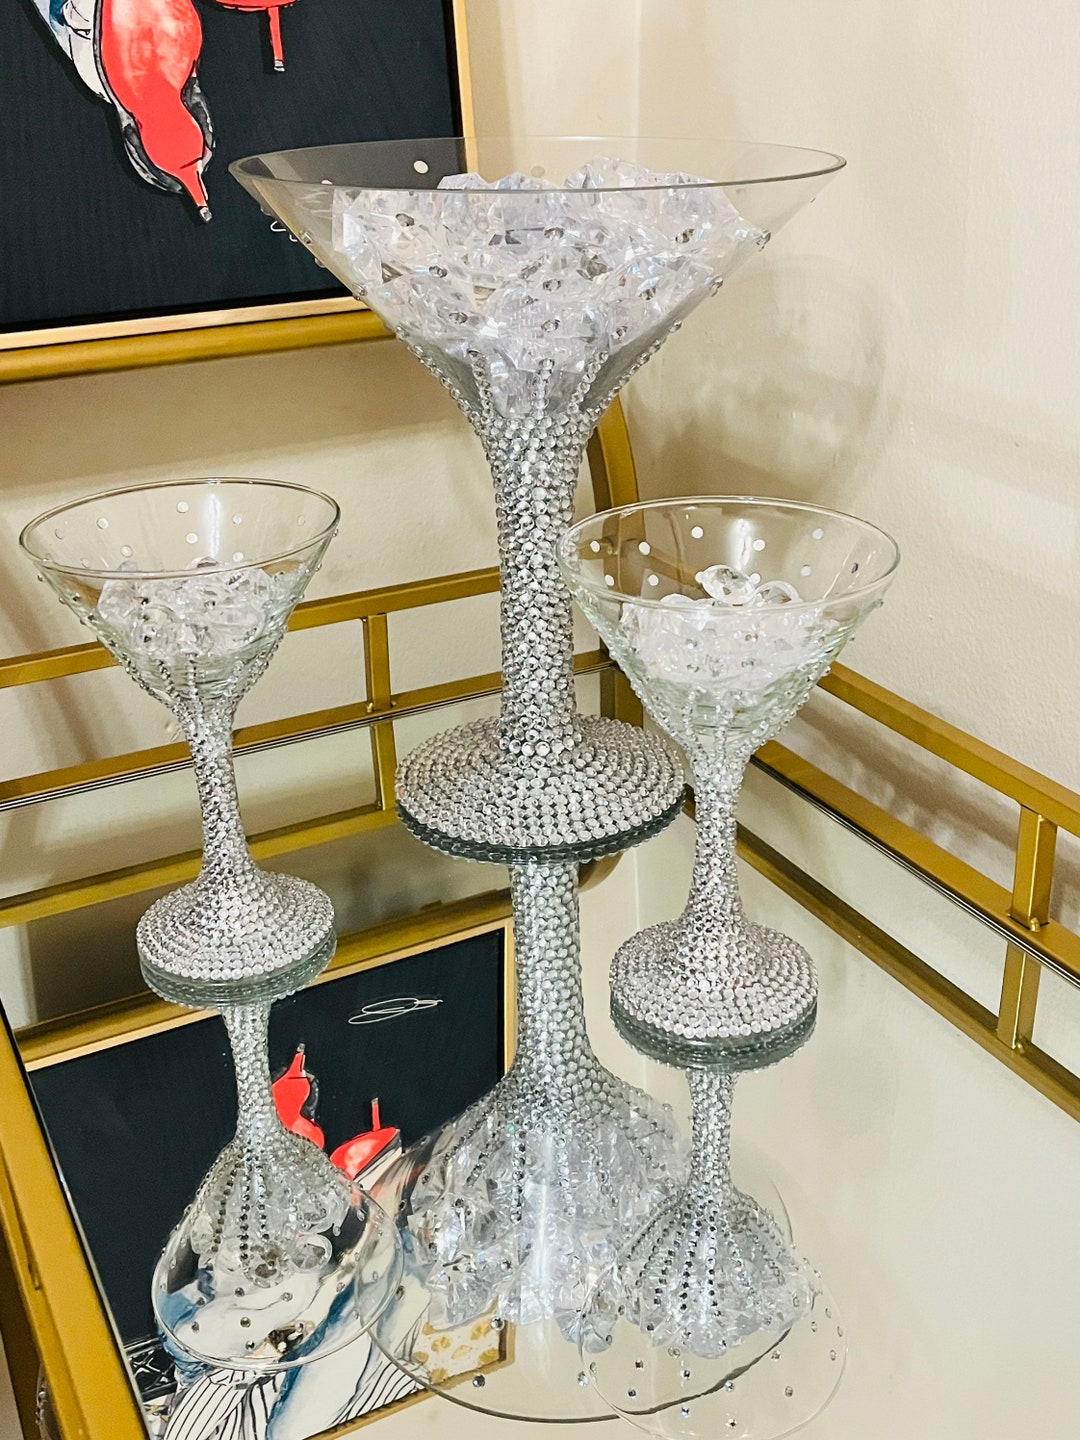 Make Statement with Our Jumbo Martini Glass